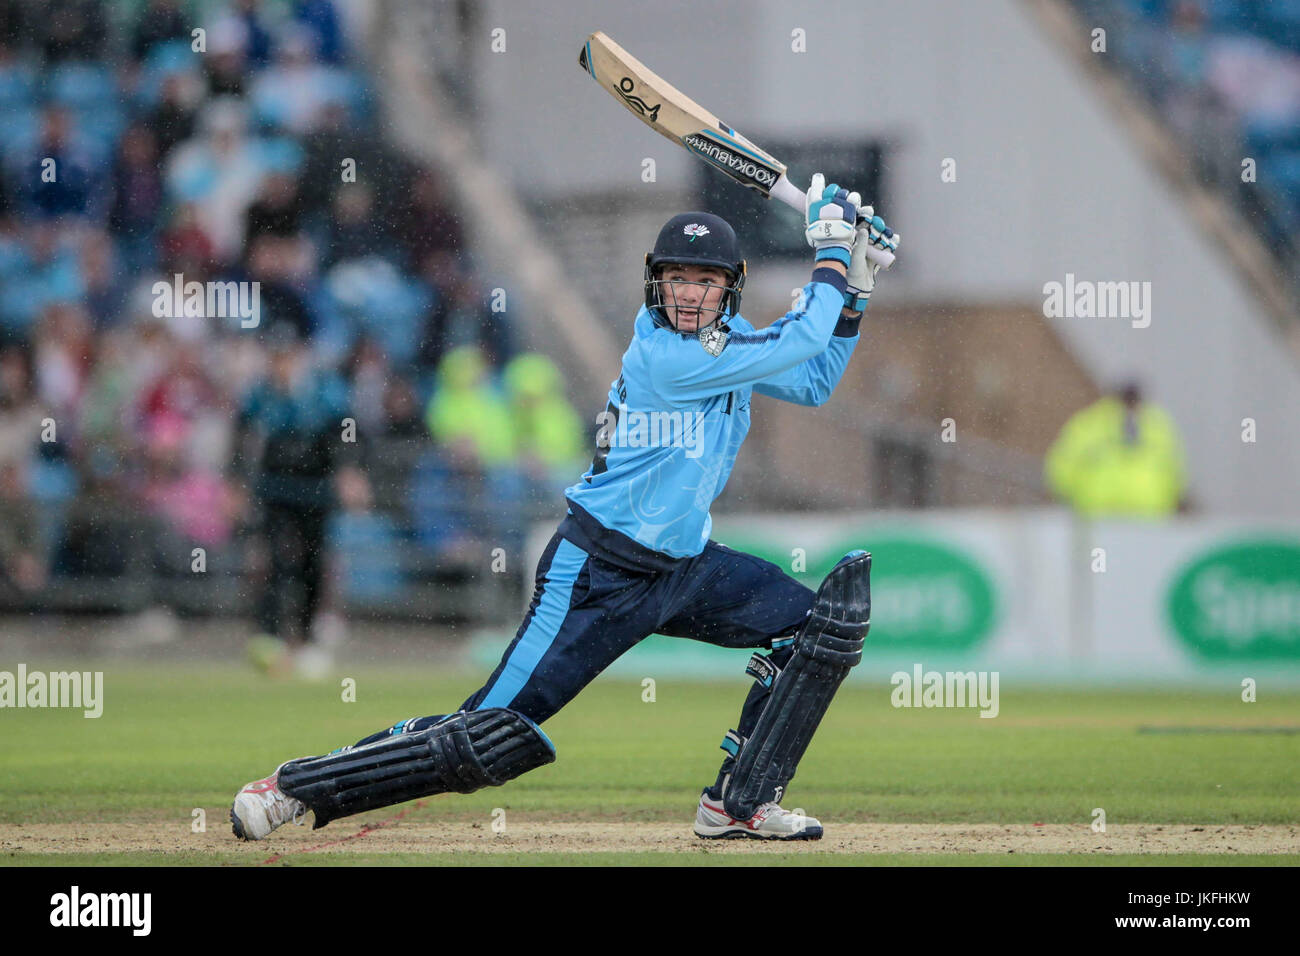 Peter Handscomb (Yorkshire CCC) watches as his shot goes in the air towards the boundary during the Natwest T20 Blast game between Yorkshire Vikings v Worcestershire Rapids on Sunday 23 July 2017. Photo by Mark P Doherty. Stock Photo